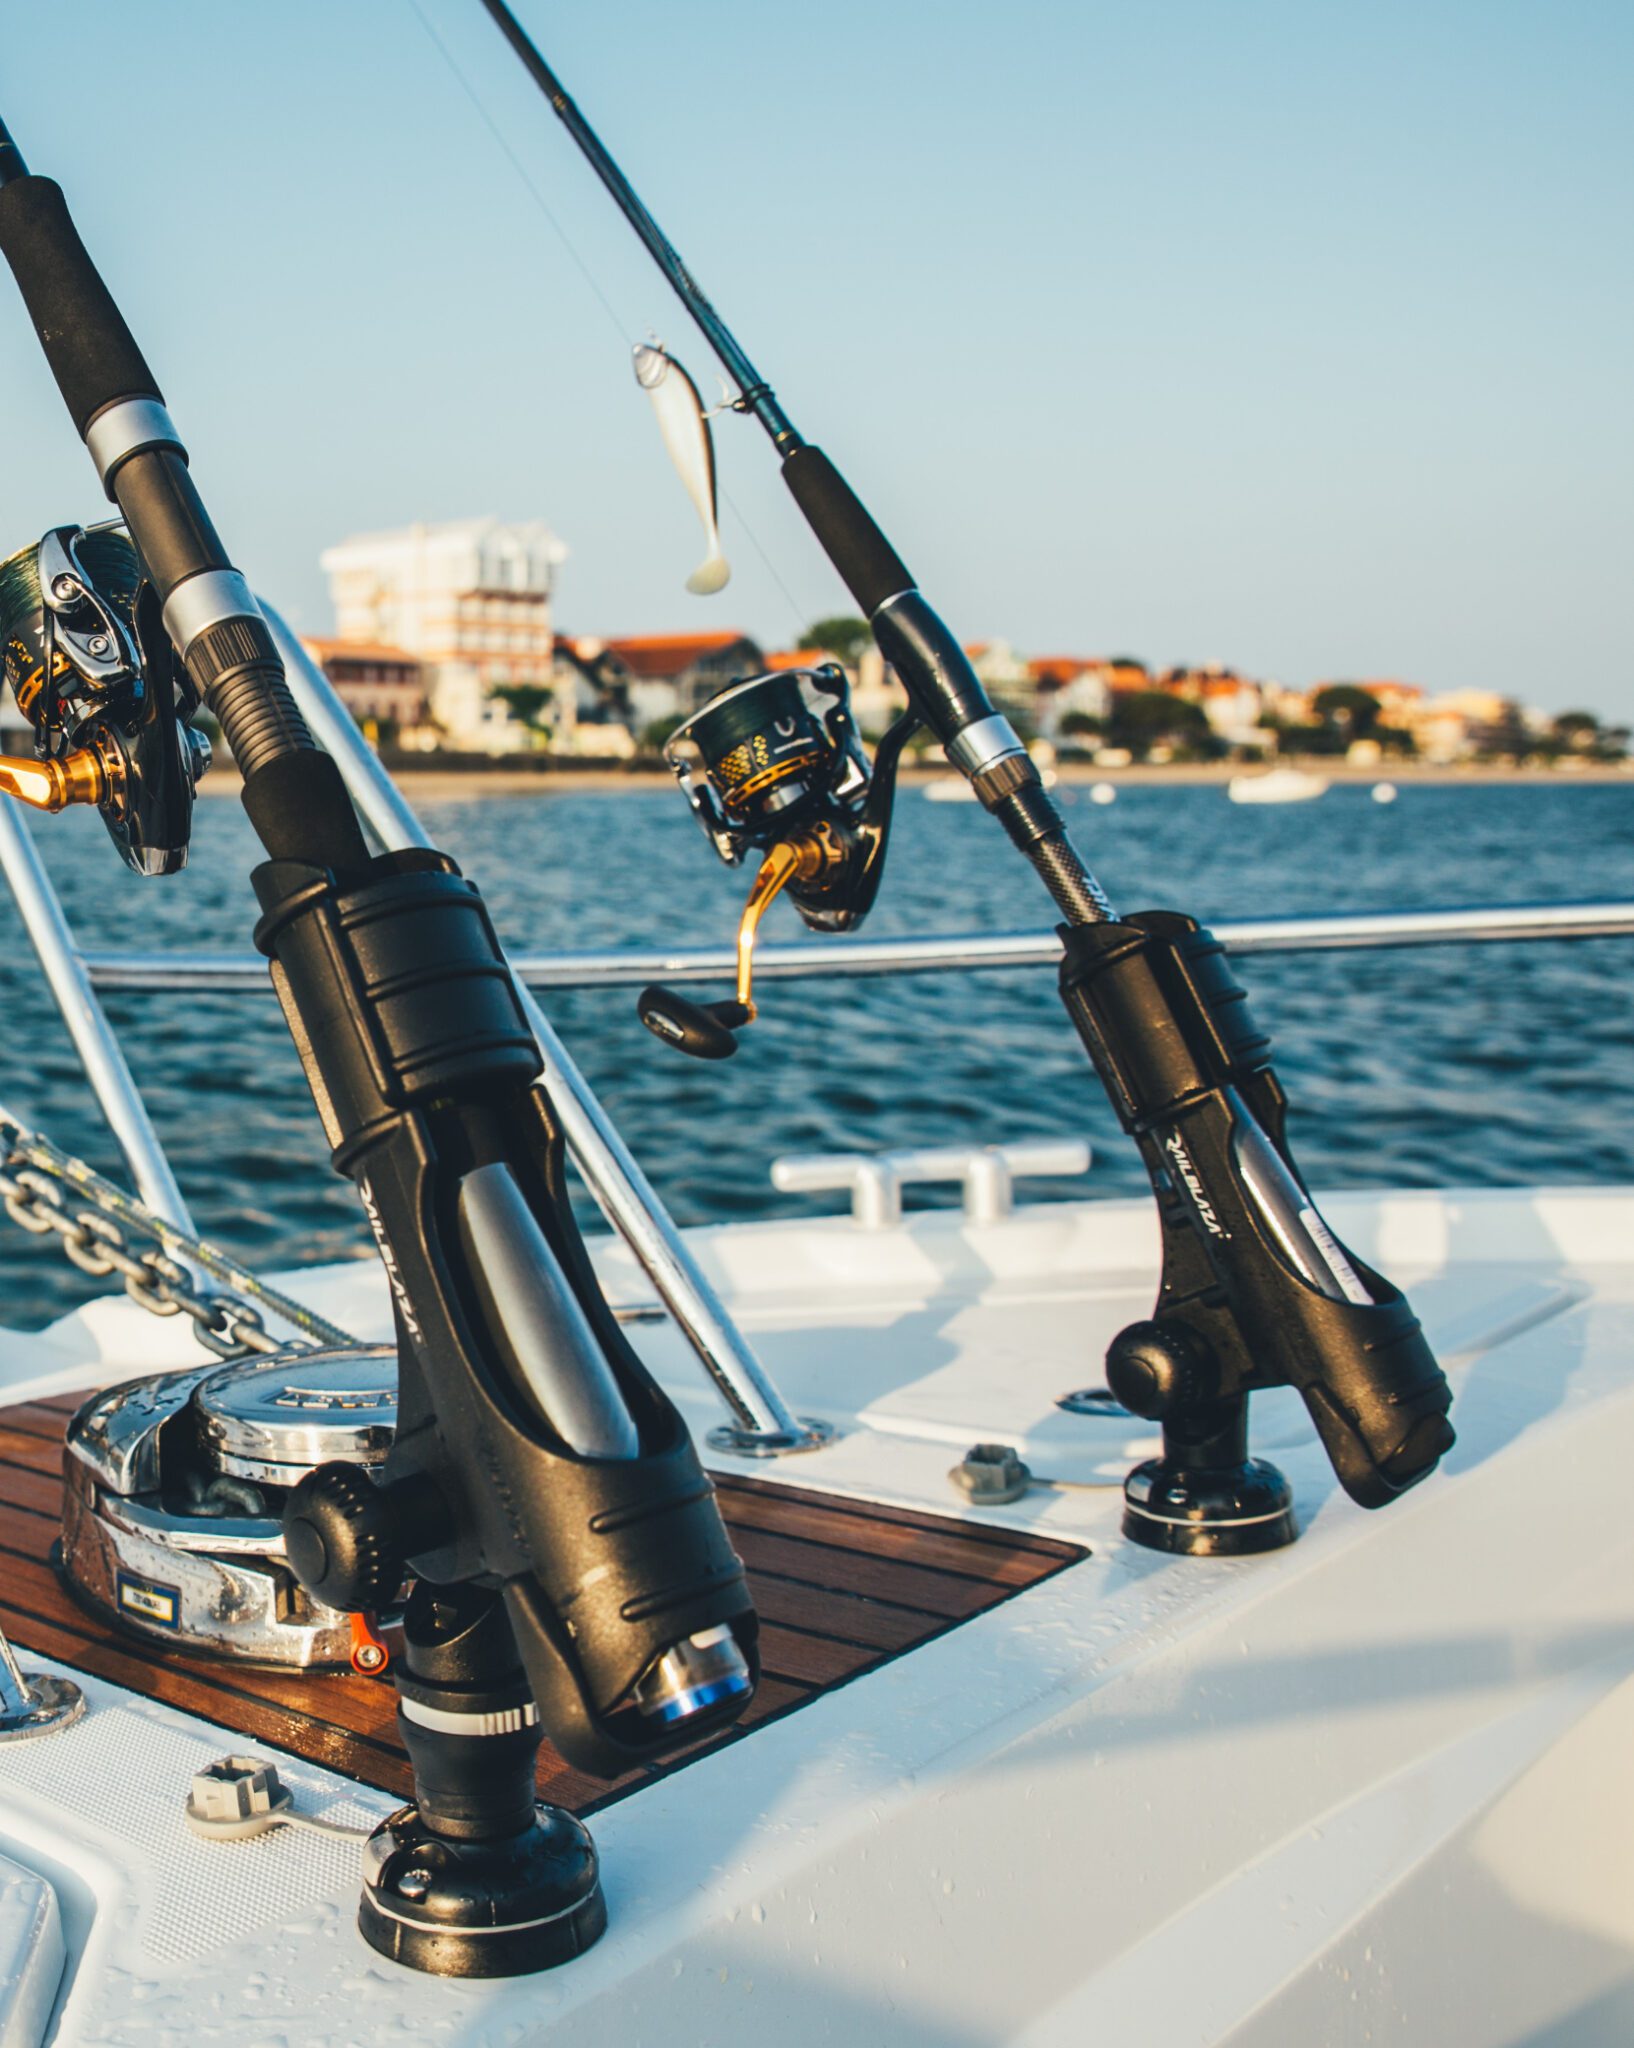 Pontoon Boat Rod Holders: Reviews of the 5 Best Fishing Pole Holders